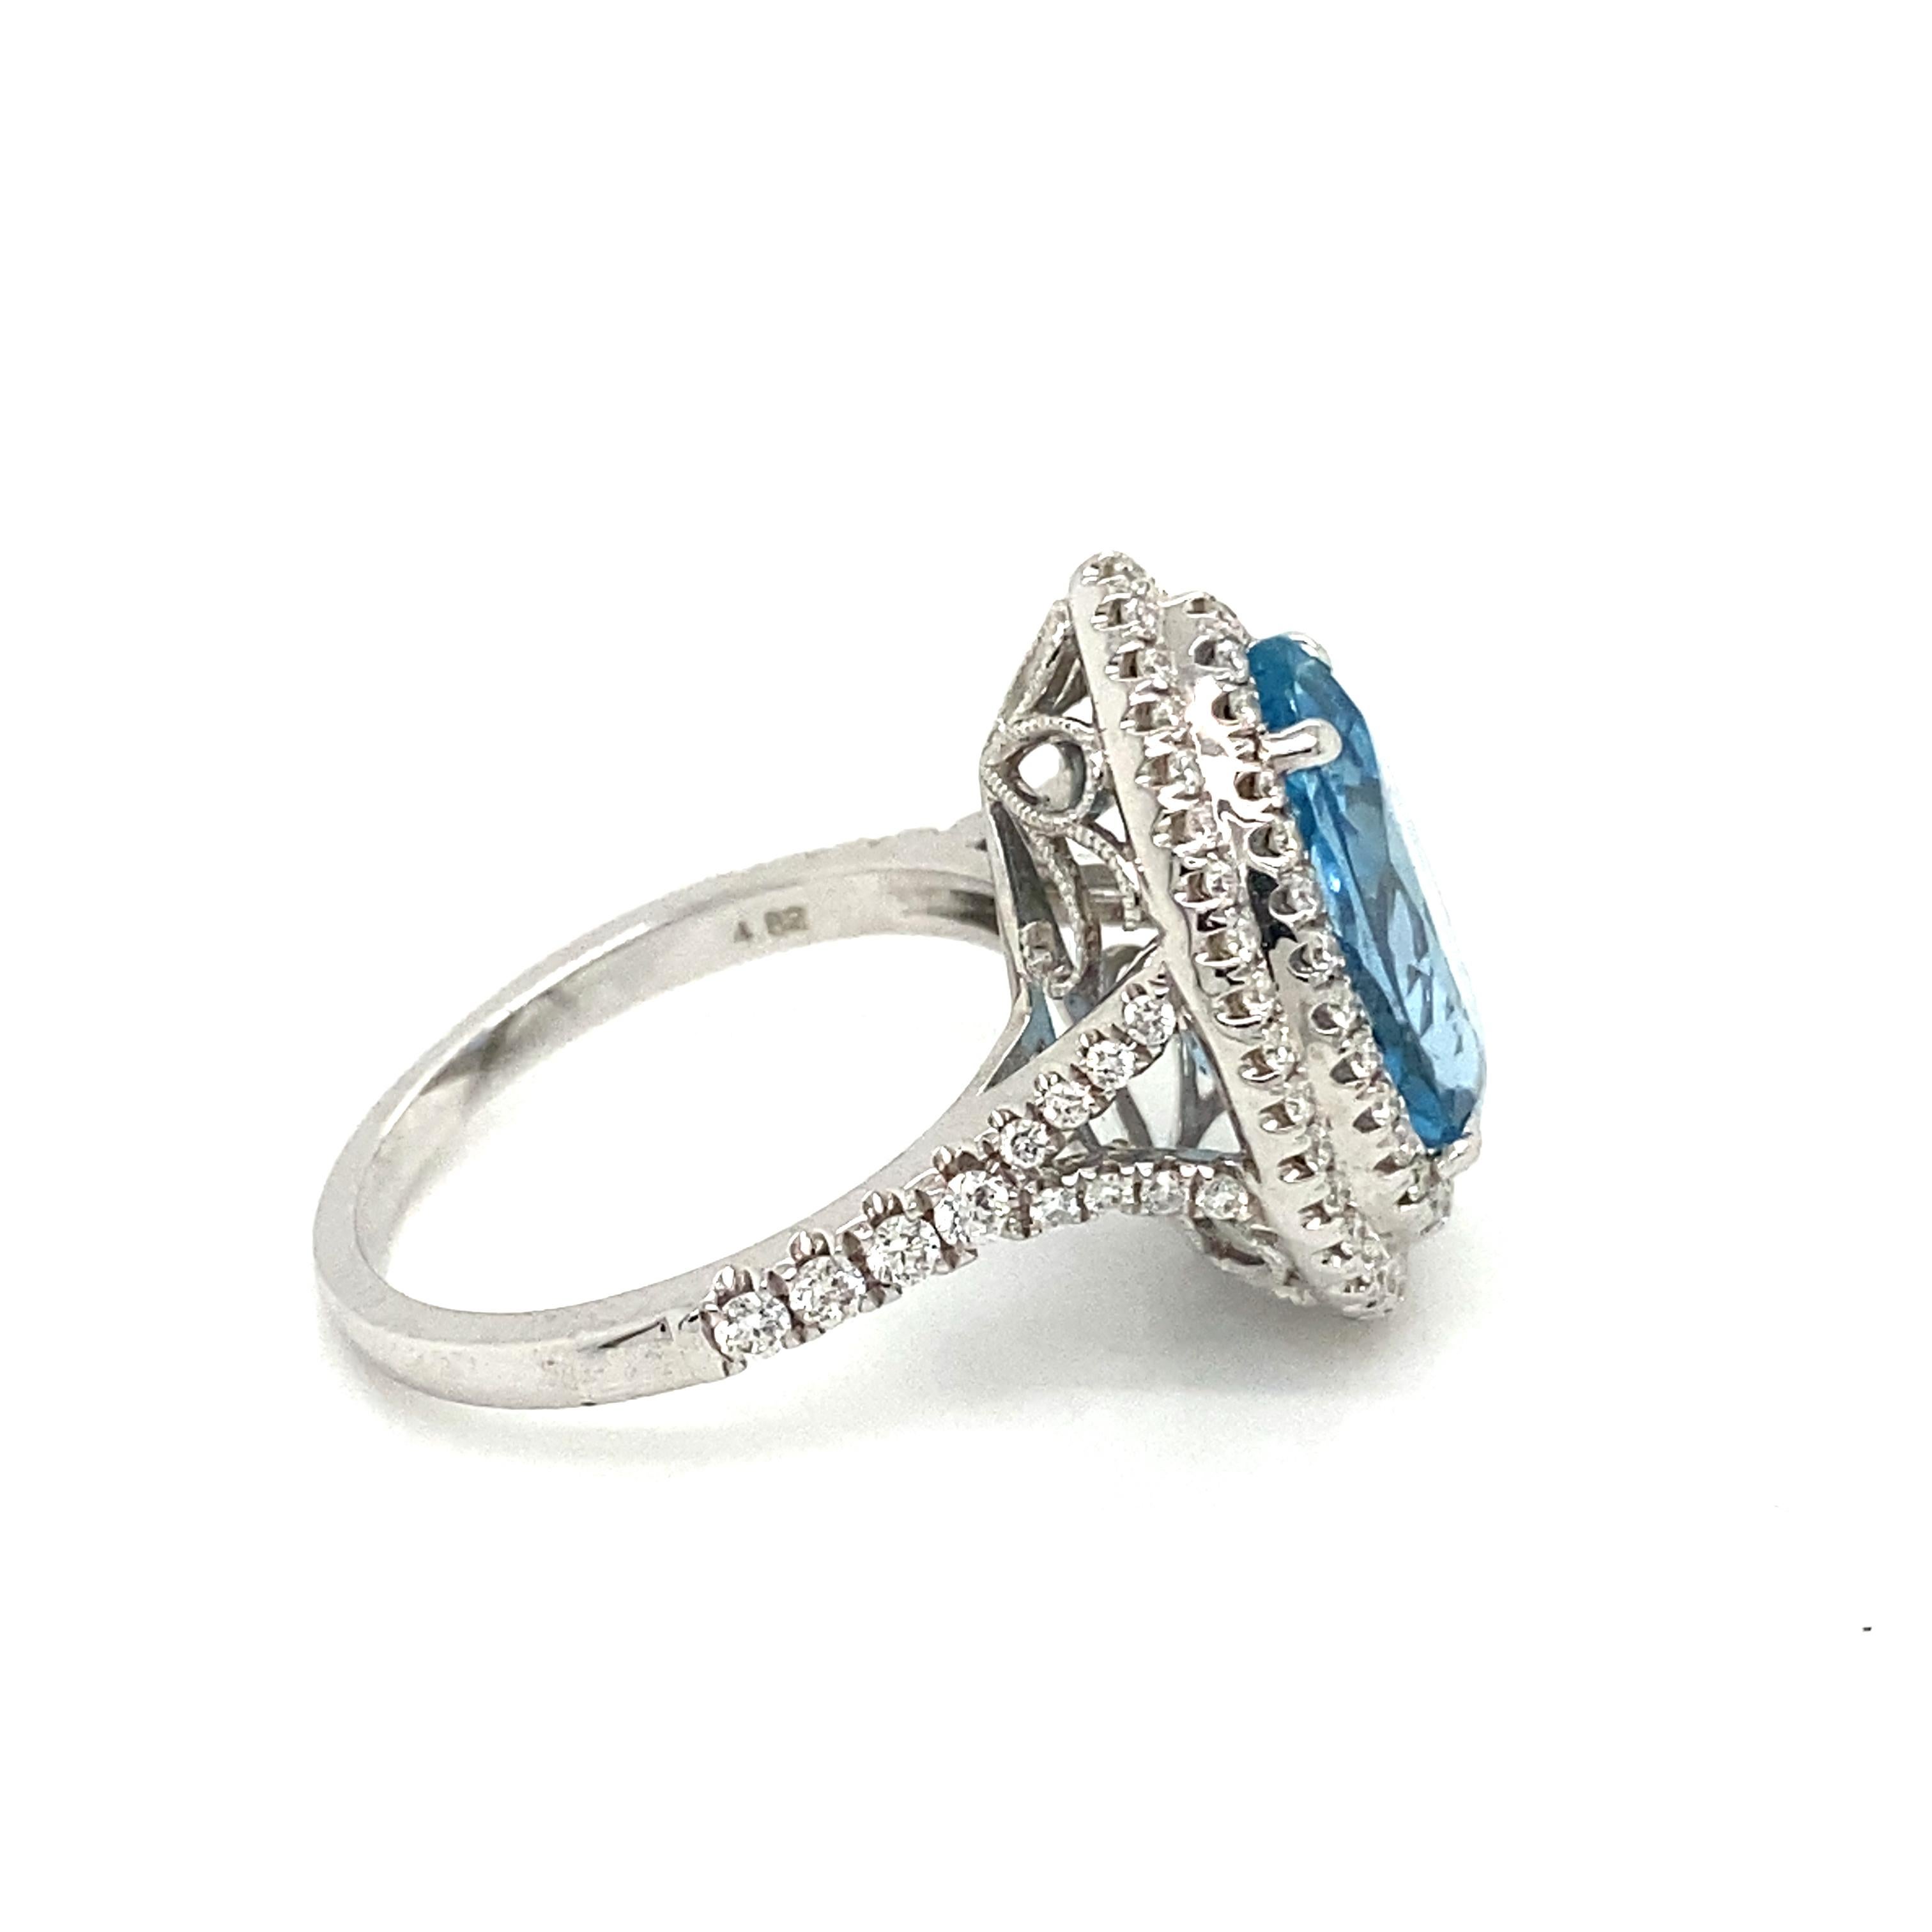 4.82 Carat Pear Shape Aquamarine and Diamond Cocktail Ring In New Condition For Sale In Great Neck, NY